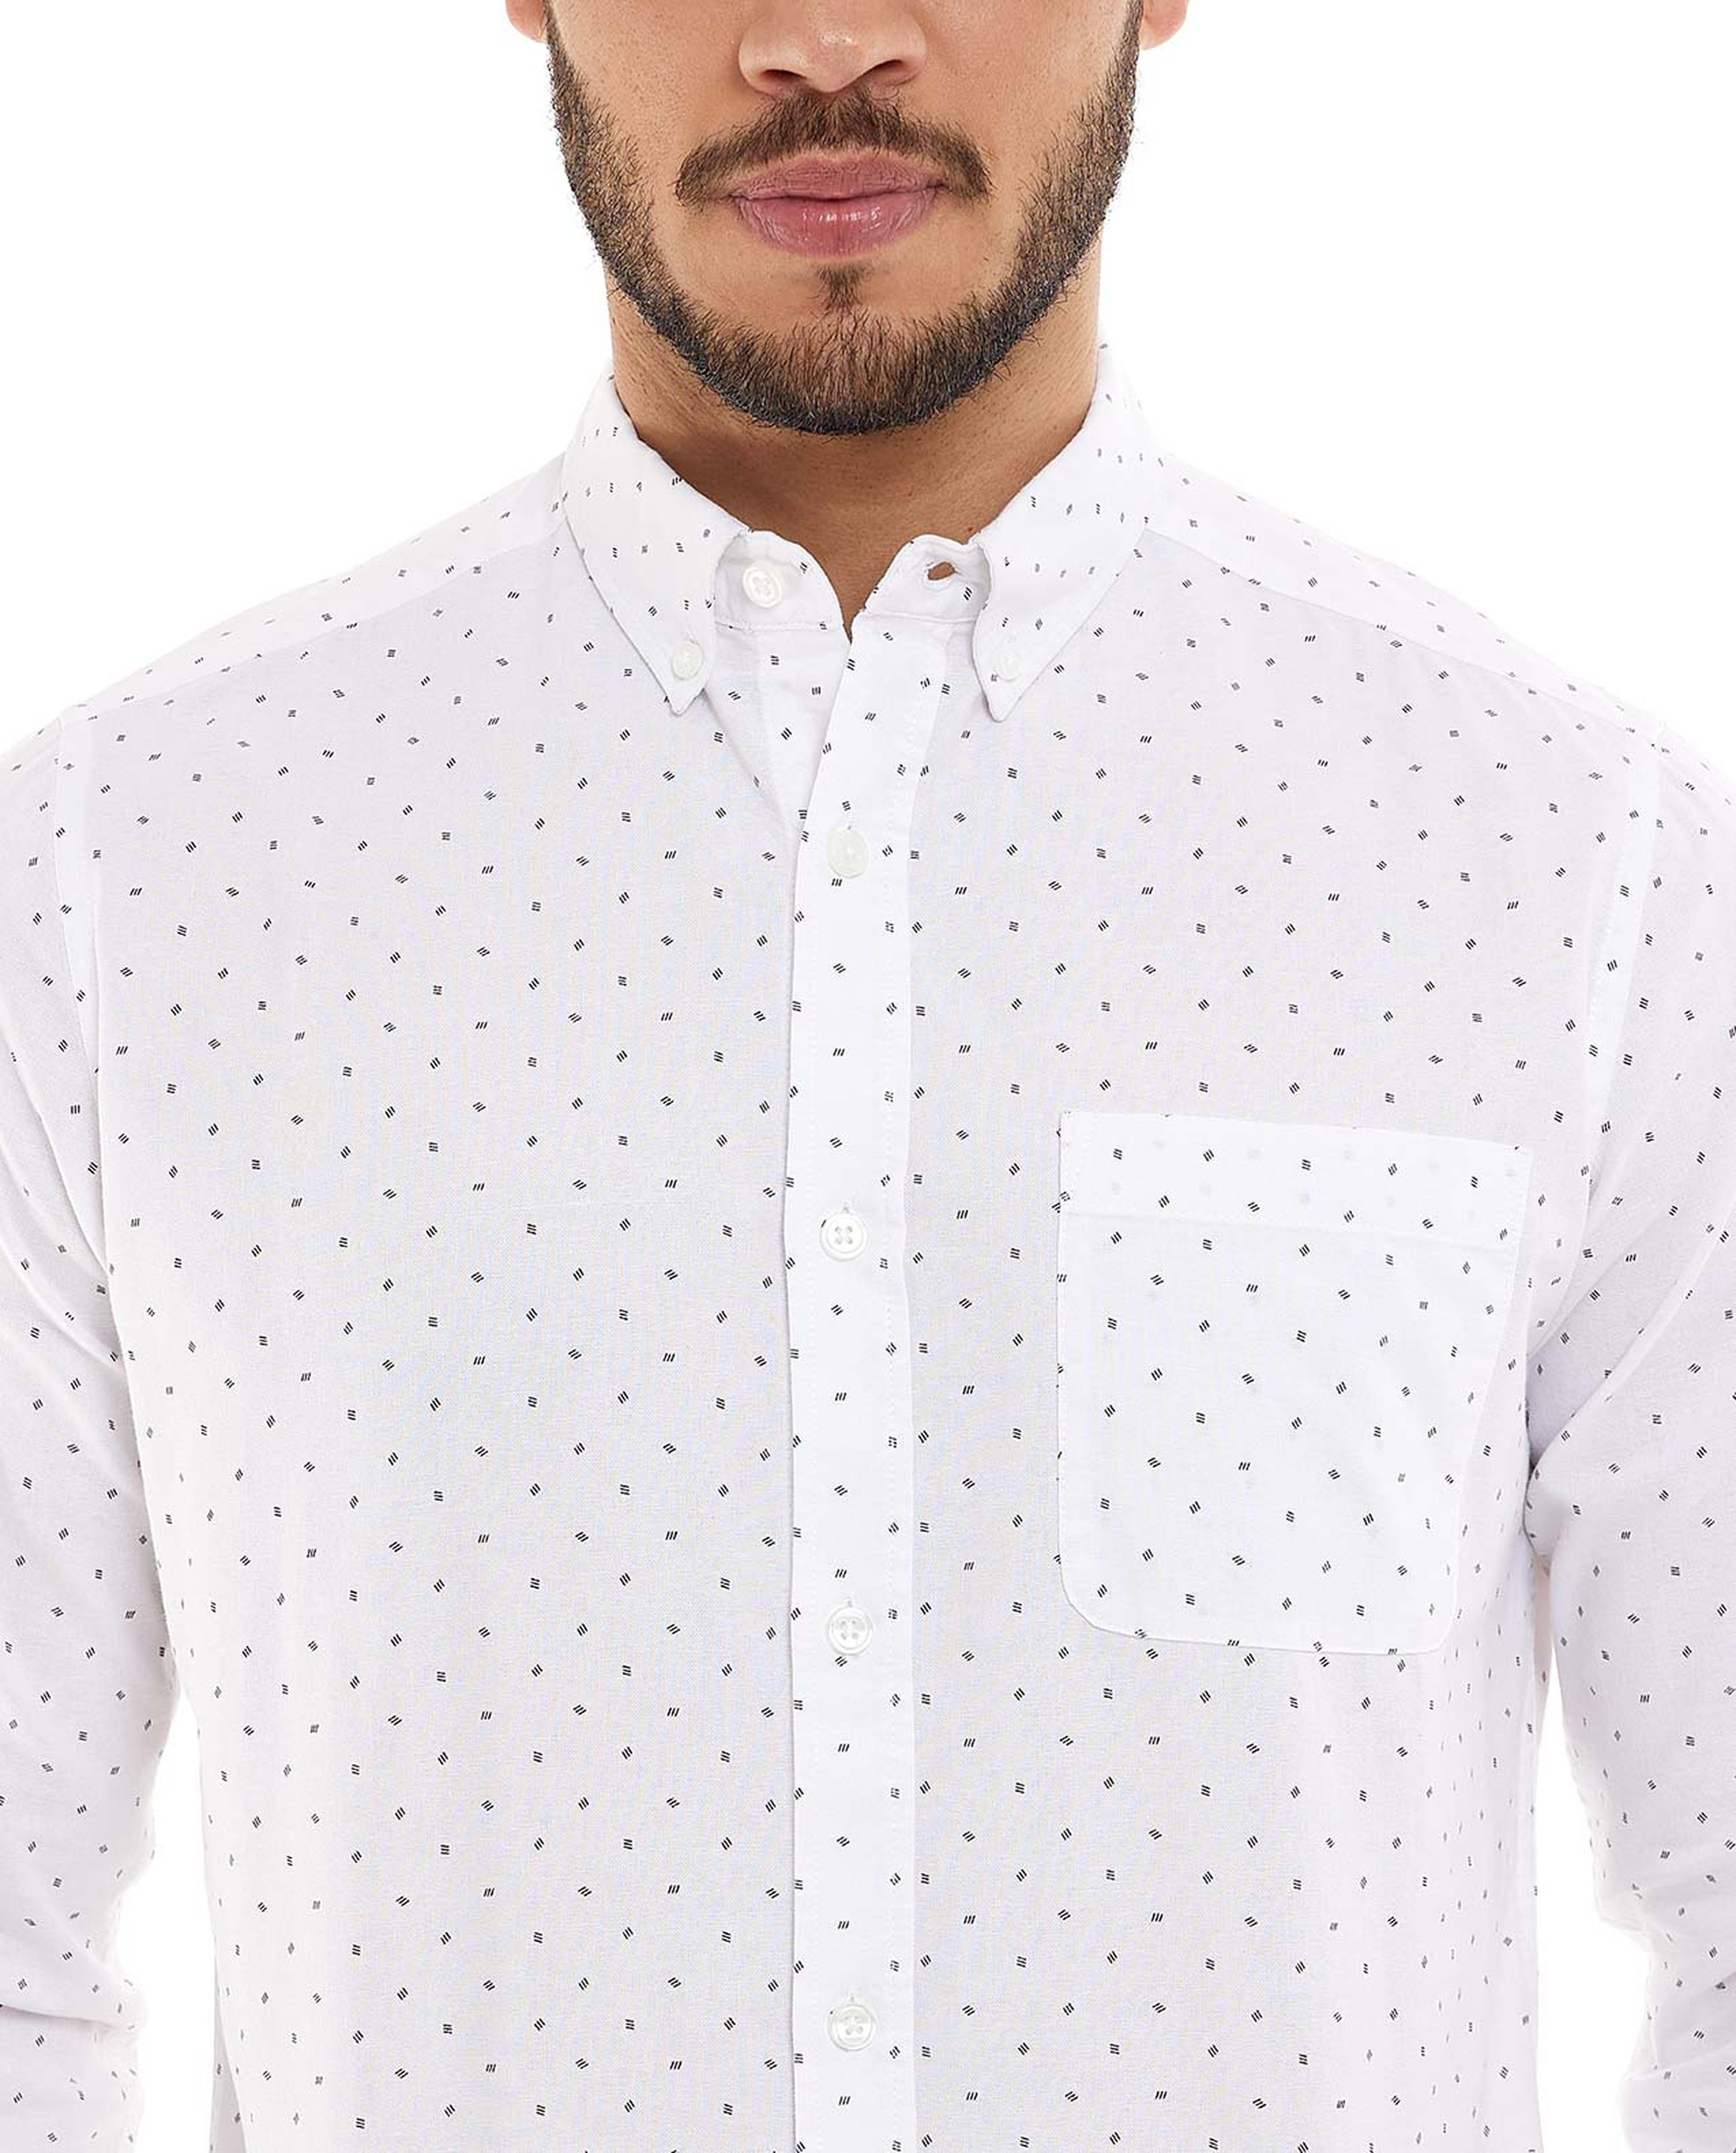 Polka Dots with Button-Down Collar and Long Sleeves